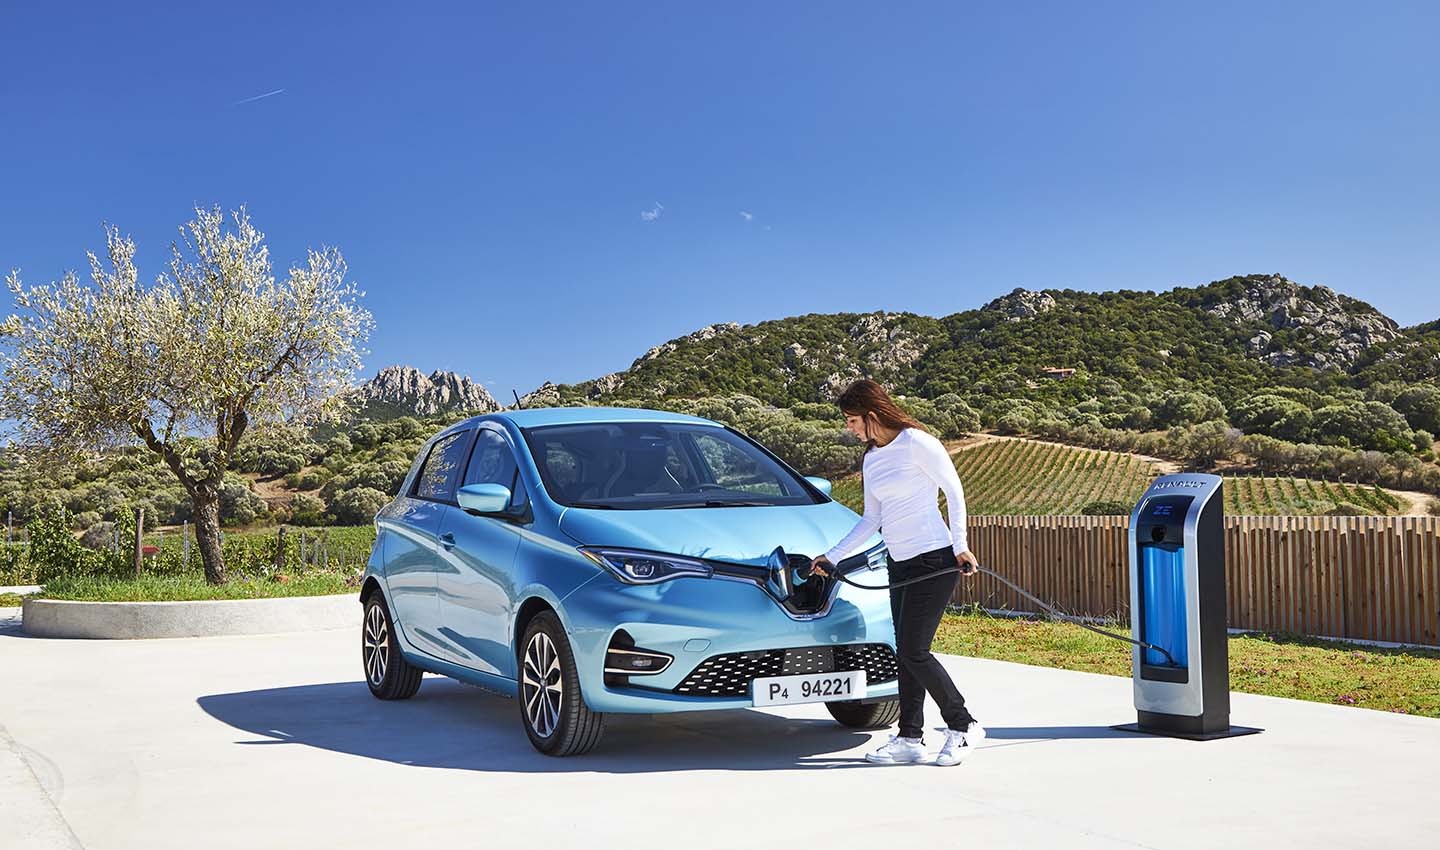 The Renault Zoe is another one of Europe’s favorite EVs, being one of the top five most sold battery powered cars this year. Image credit: Renault